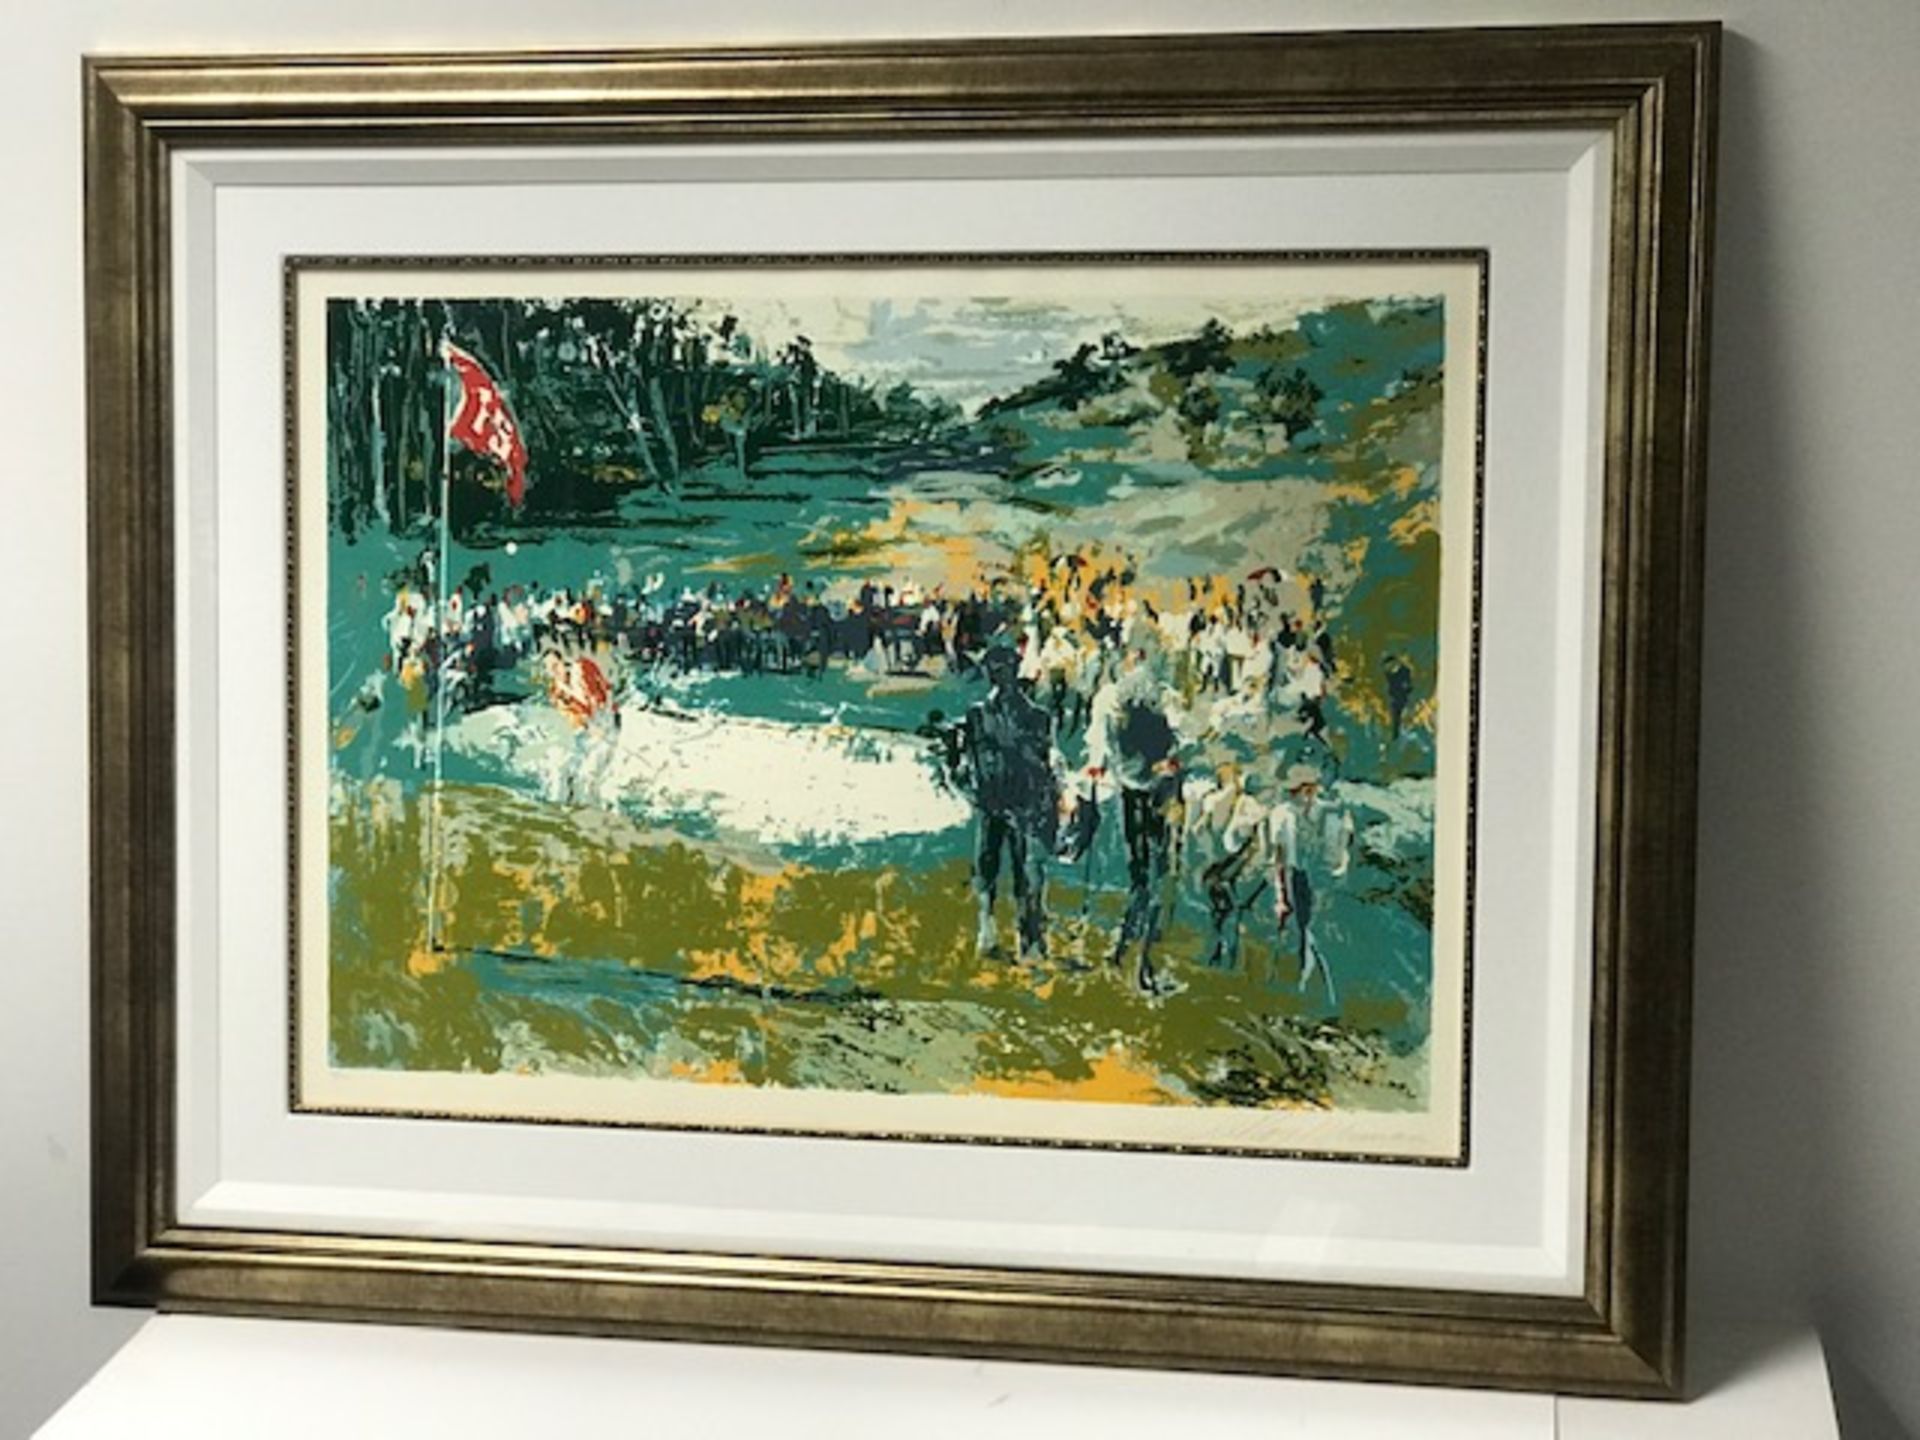 Golf 15th Hole by LeRoy Neiman (1921-2012) - Image 3 of 3